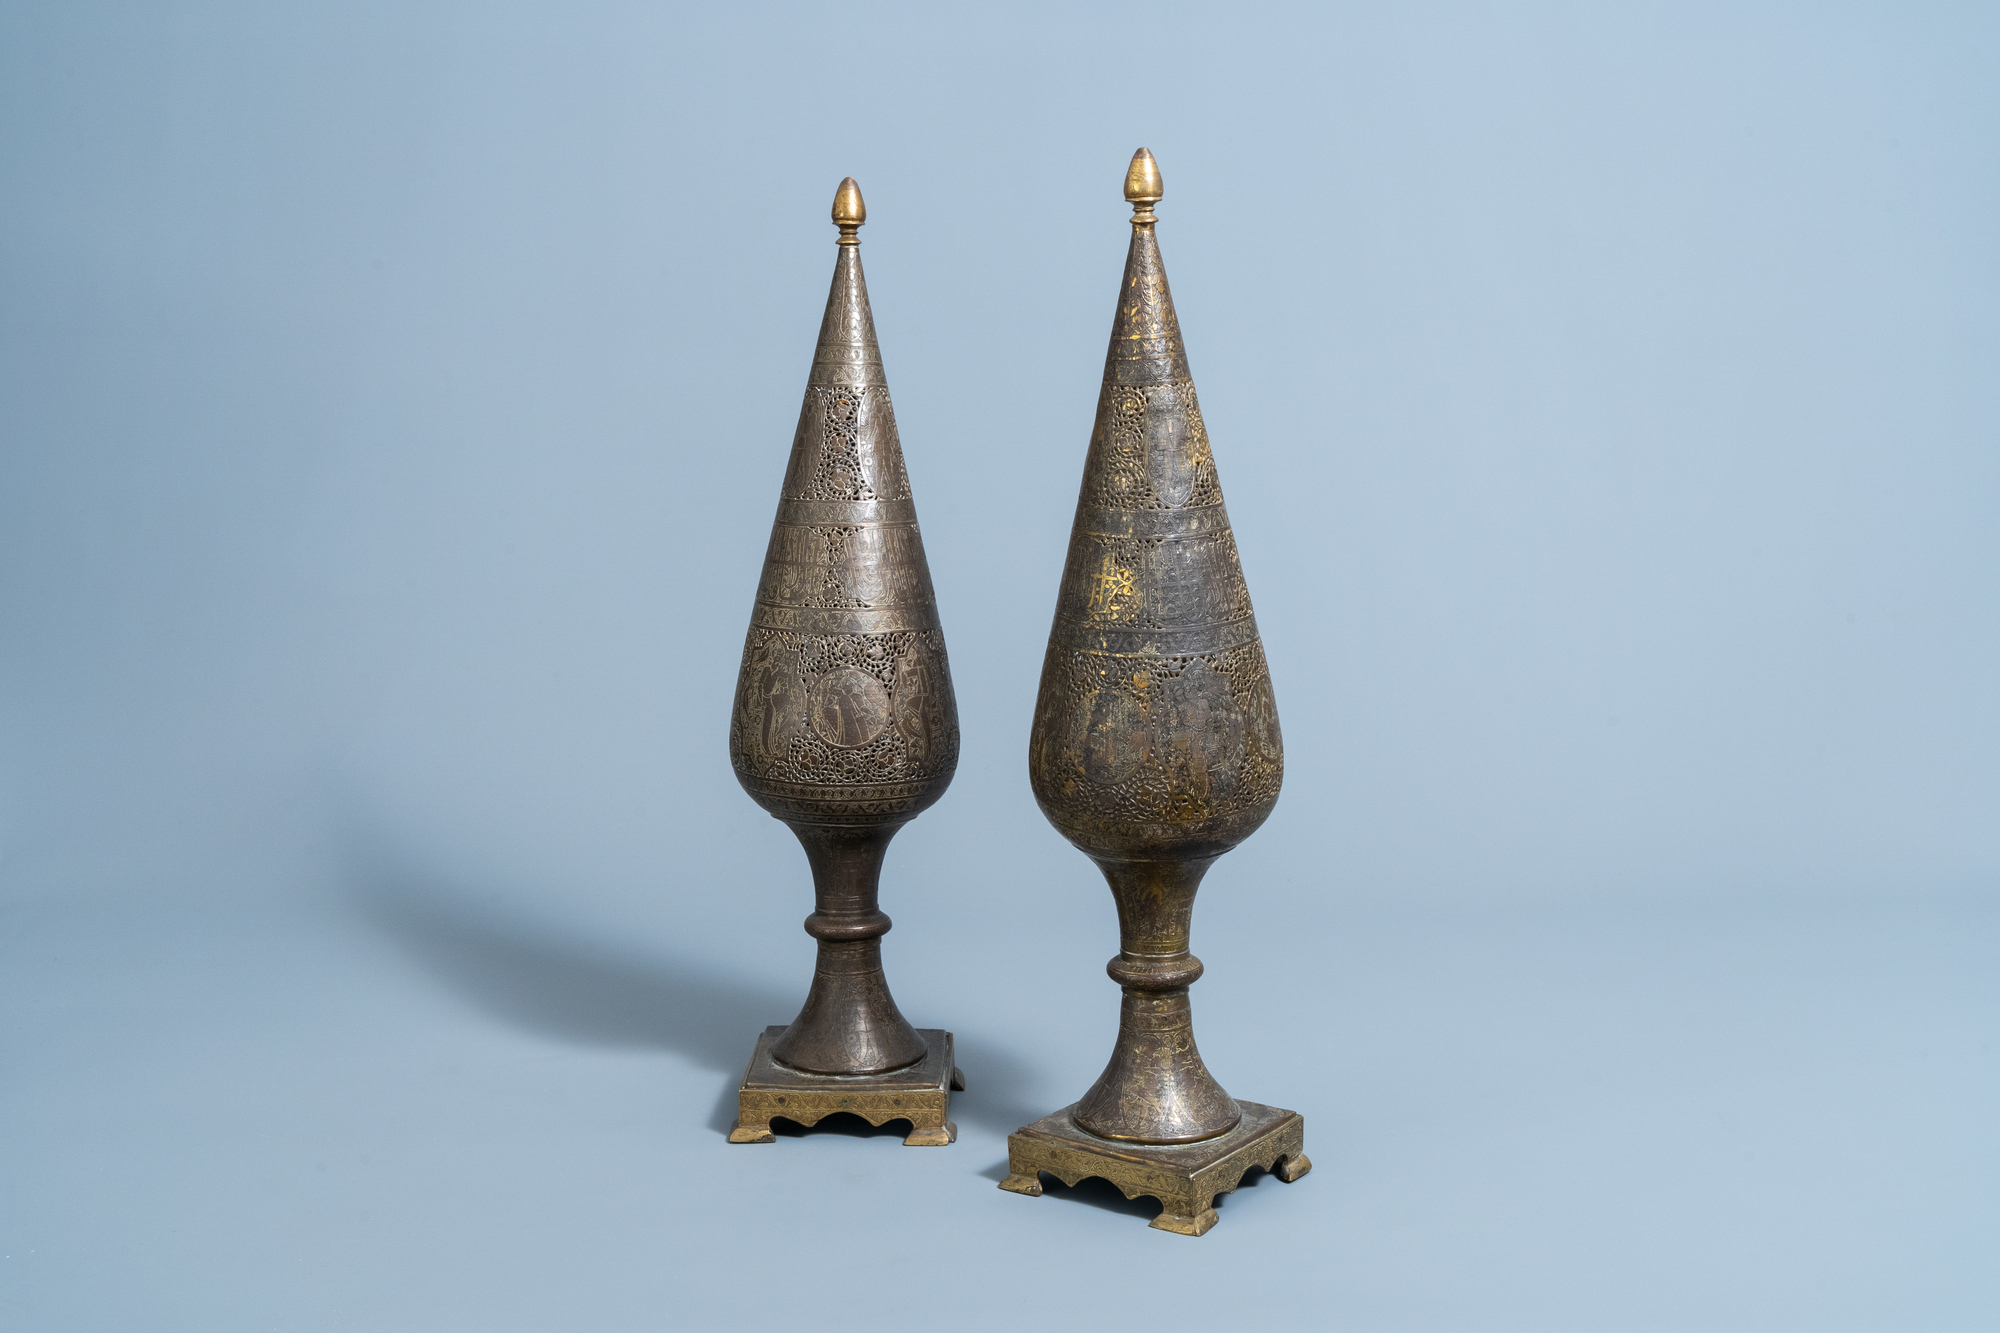 A pair of reticulated gilt bronze cone shaped ornaments with figures and calligraphy, Qajar, Iran, 1